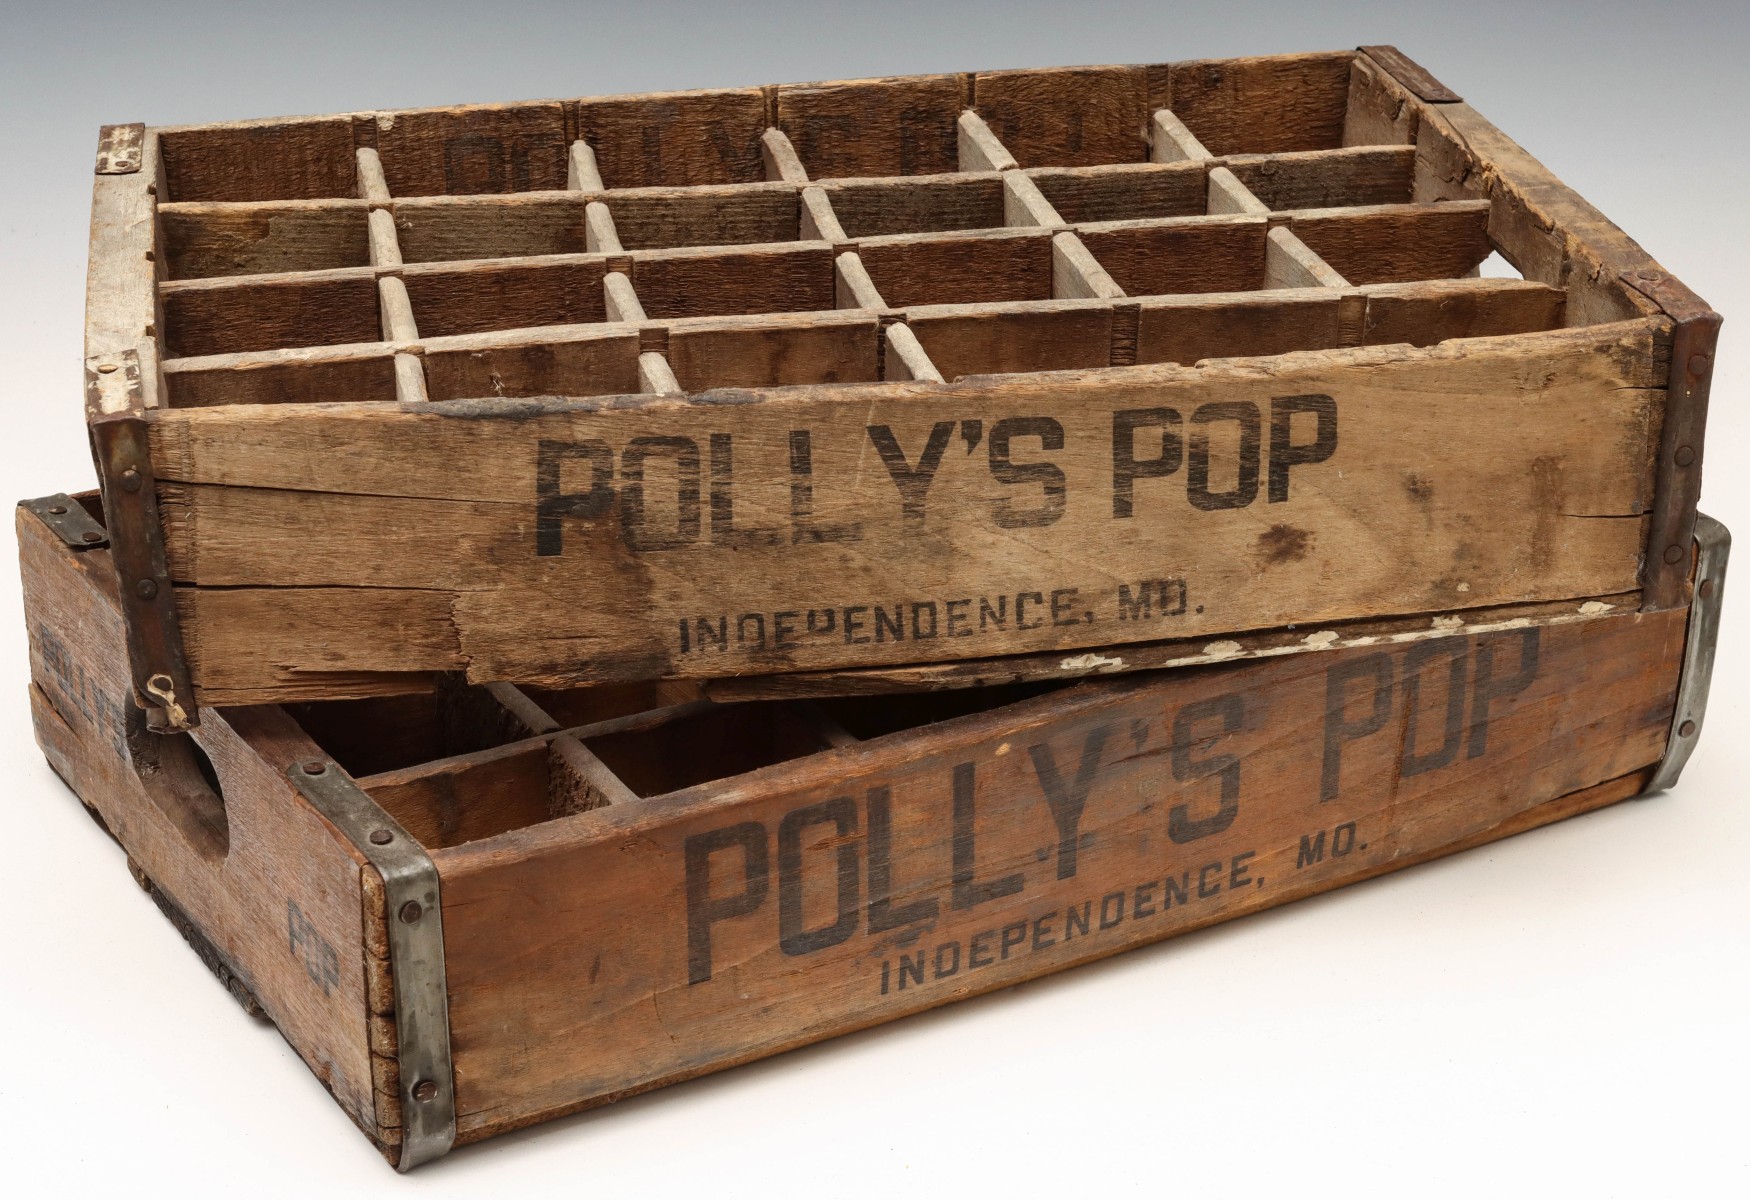 TWO POLLY'S POP 24 BOTTLE ADVERTISING CRATES